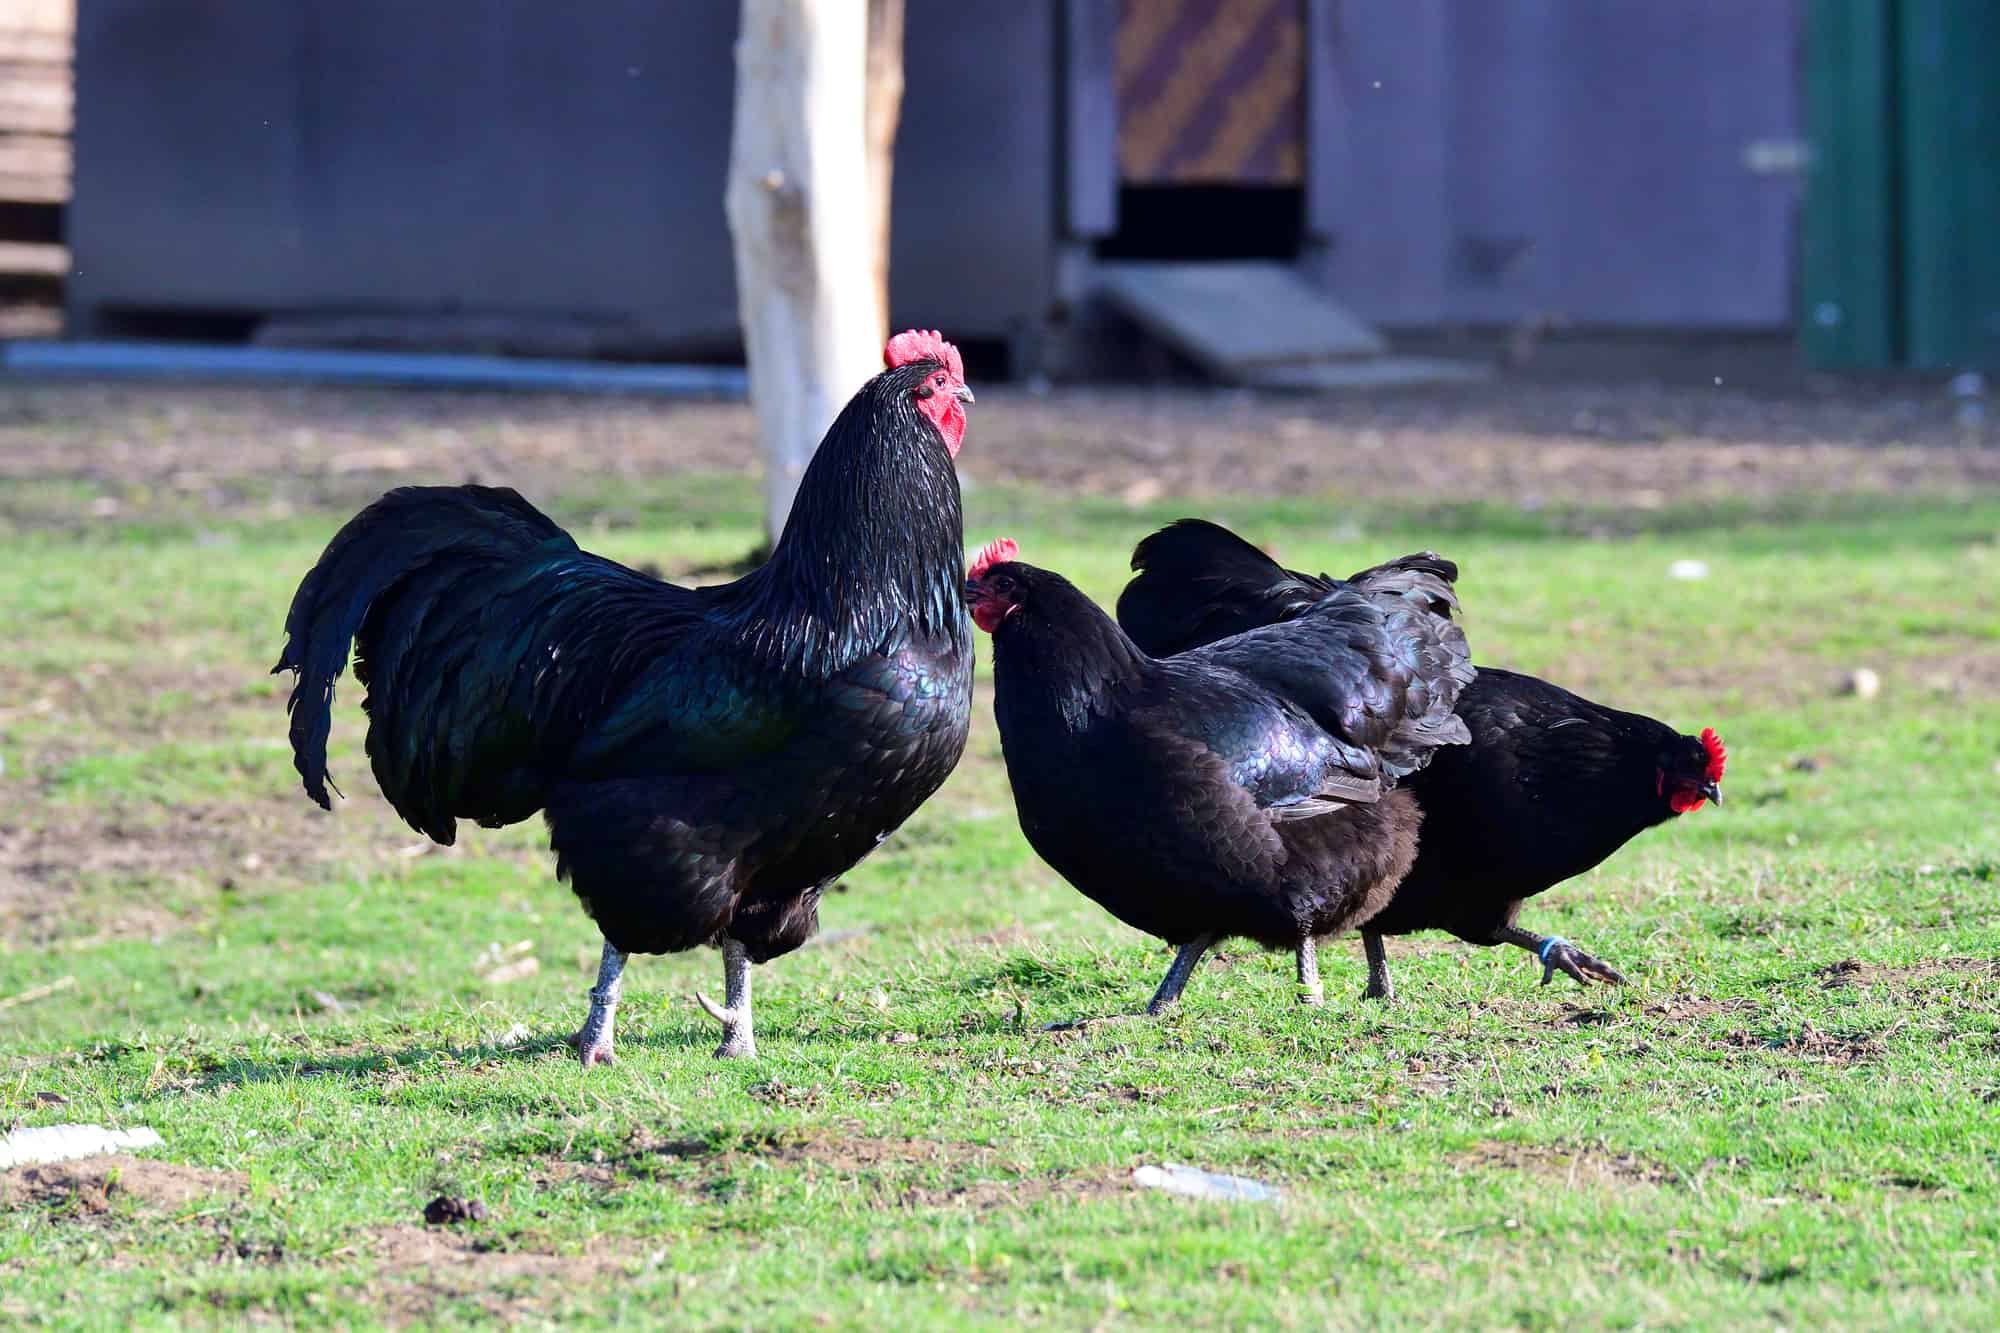 Australorp rooster and hens